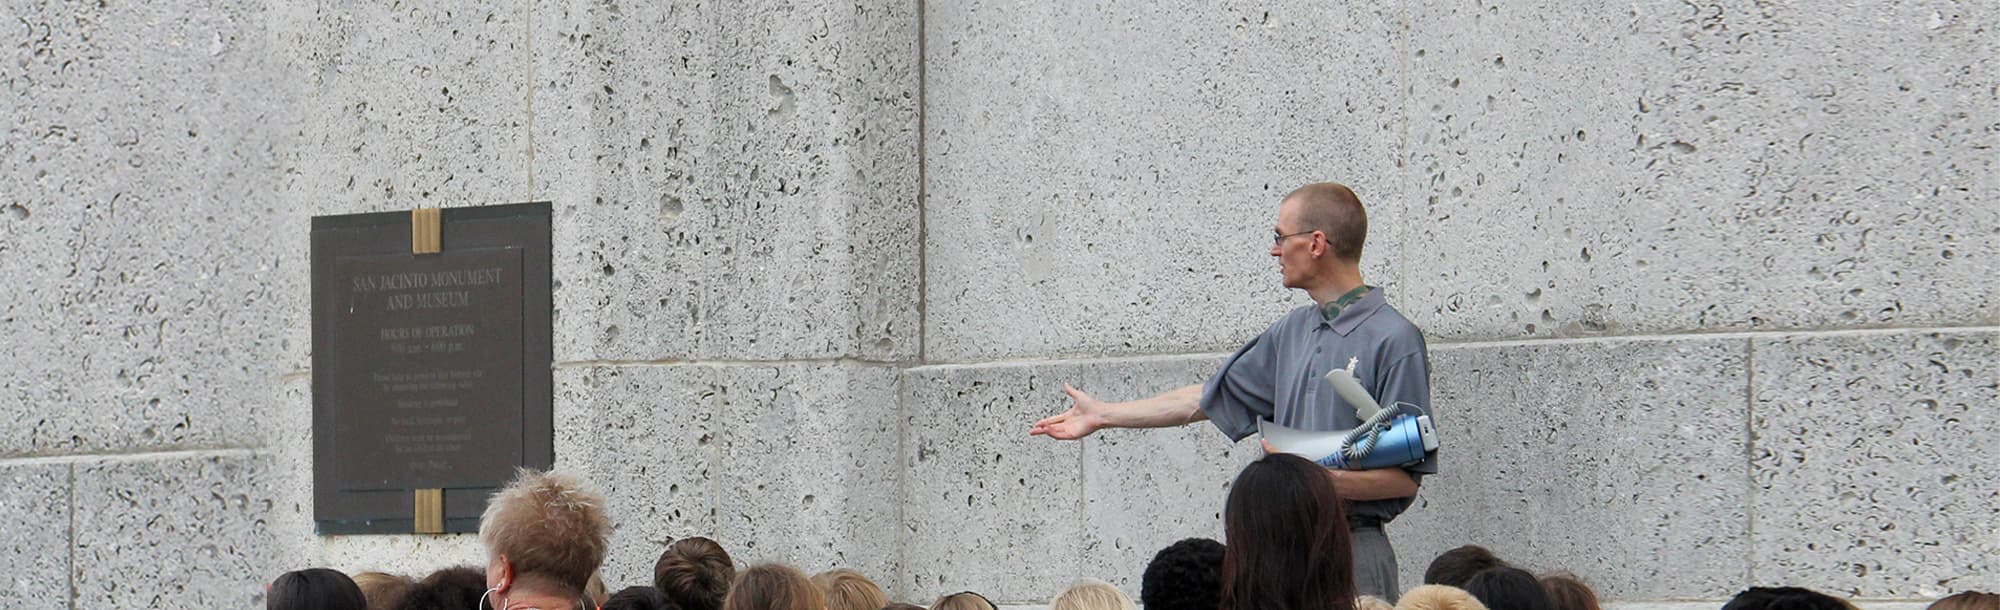 A tour guide gesturing to a plaque on the outside wall of the San Jacinto Monument